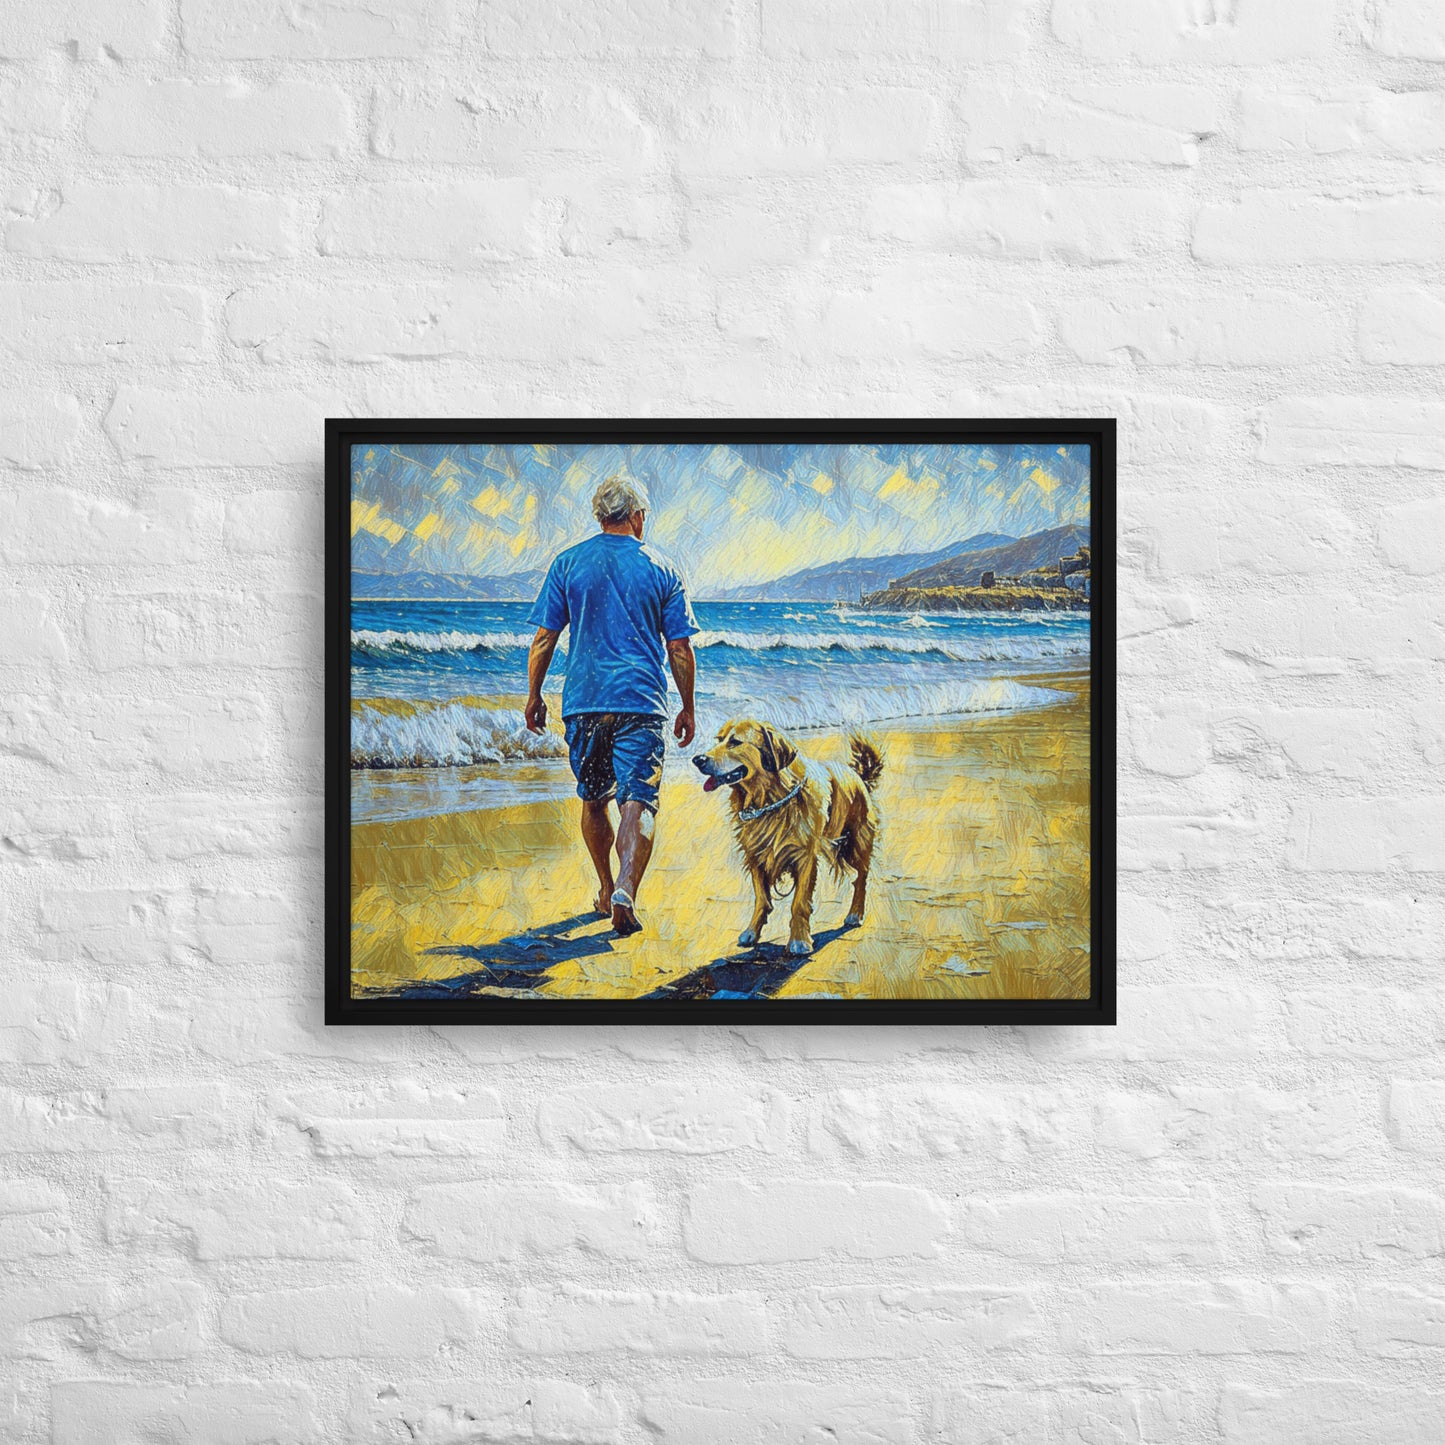 Weekend at the Beach - Digital Art - Framed canvas - FREE SHIPPING